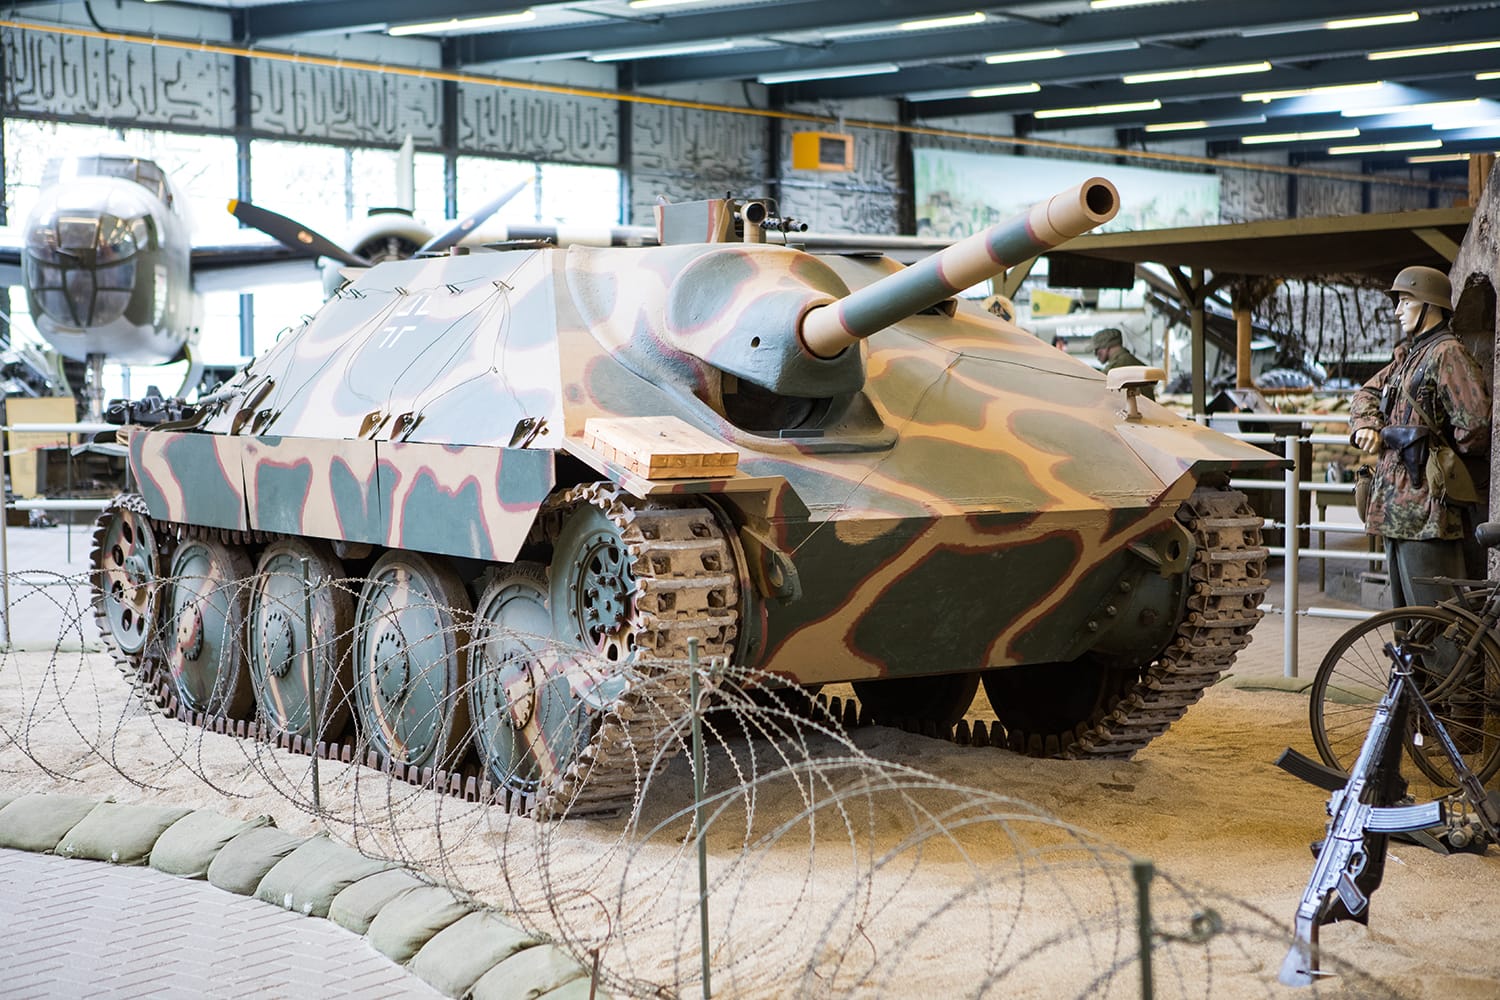 Overloon War Museum exhibit with military vehicles